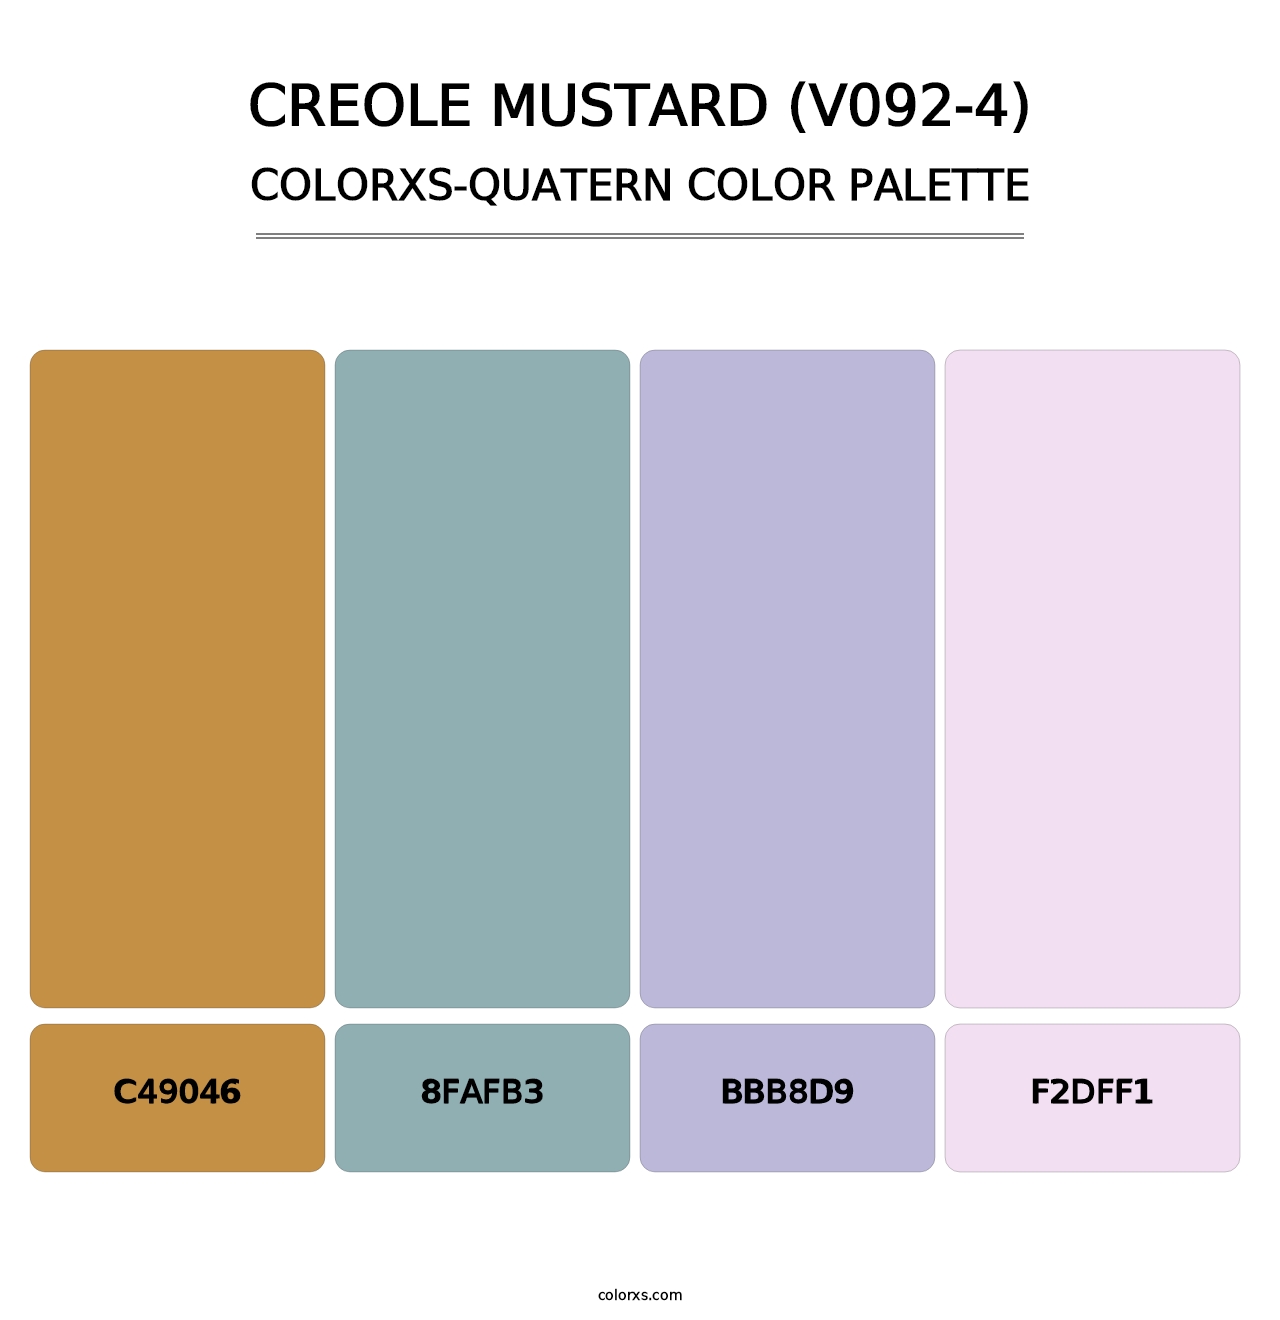 Creole Mustard (V092-4) - Colorxs Quatern Palette